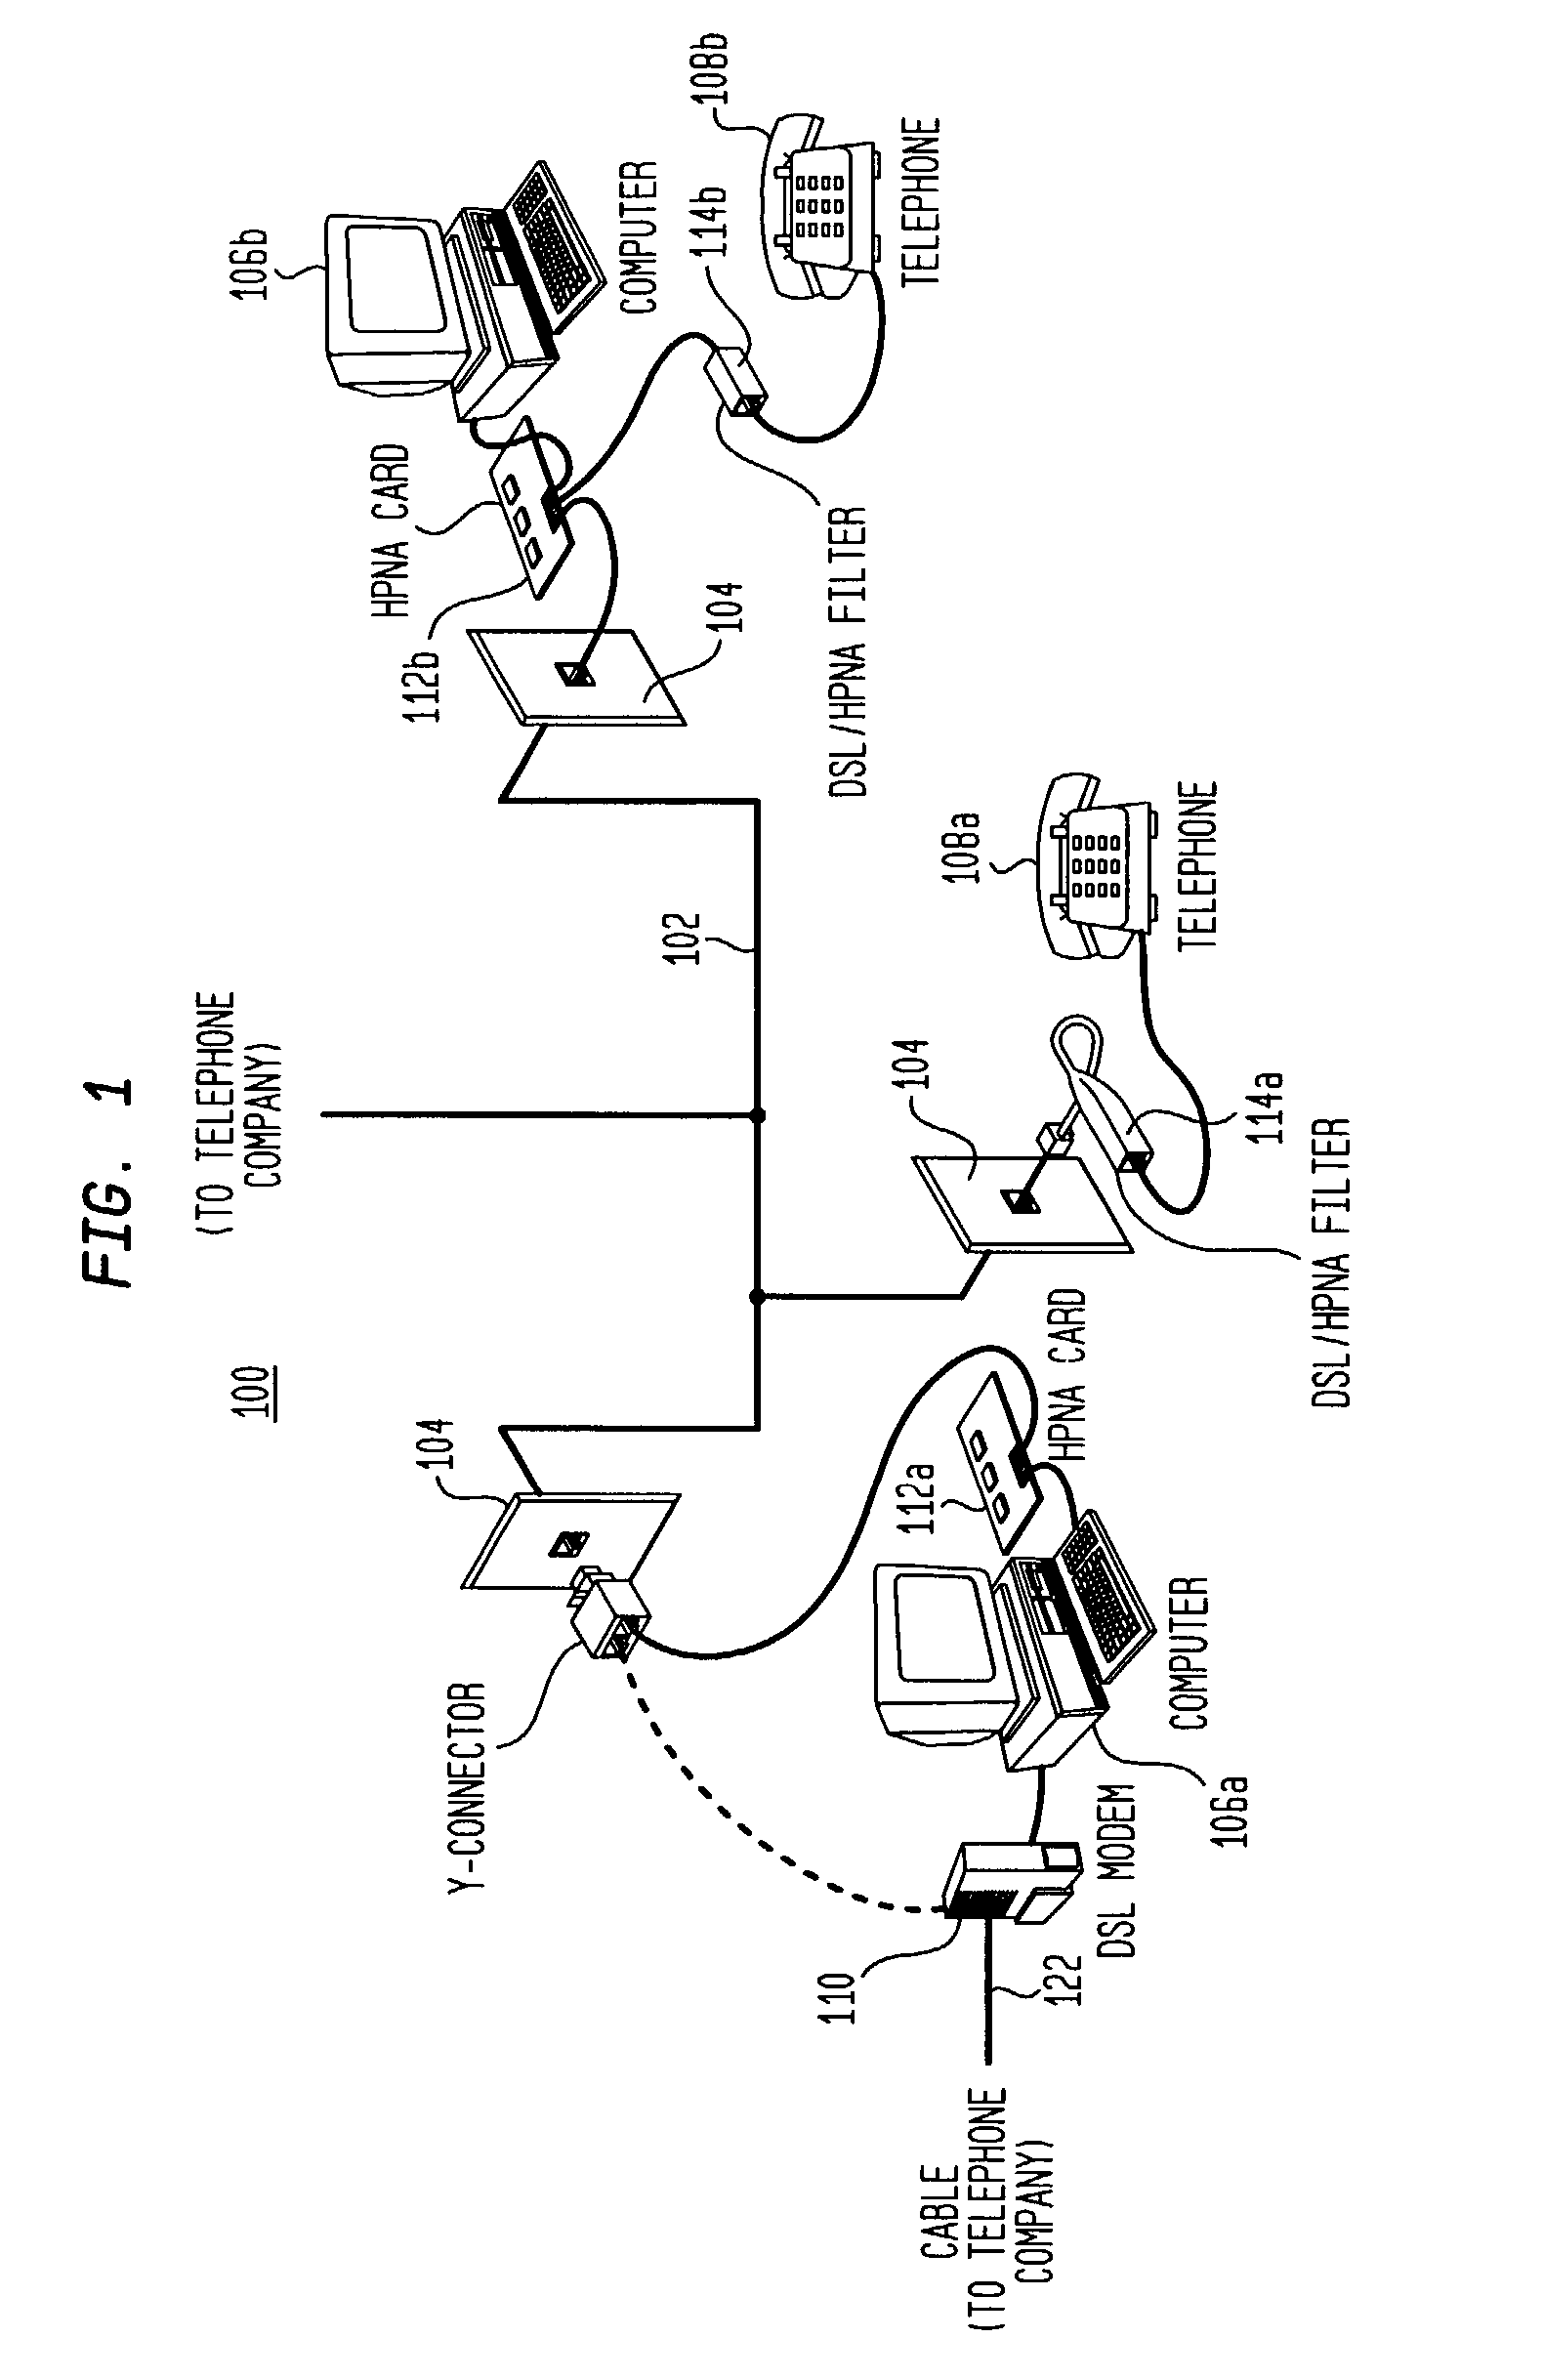 Dynamic frequency passband switching in home phone-line networks